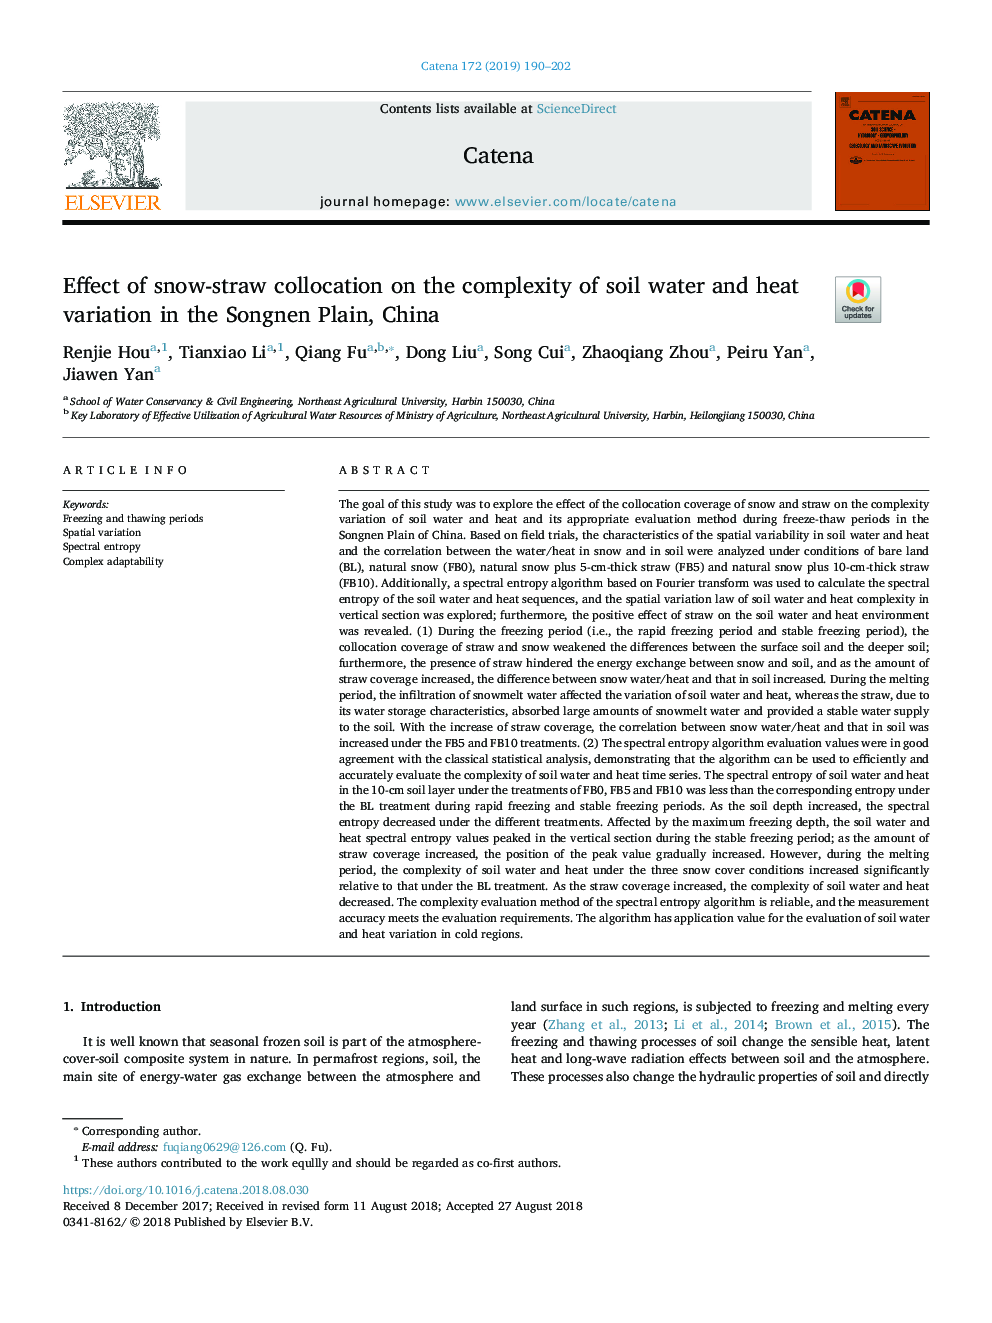 Effect of snow-straw collocation on the complexity of soil water and heat variation in the Songnen Plain, China